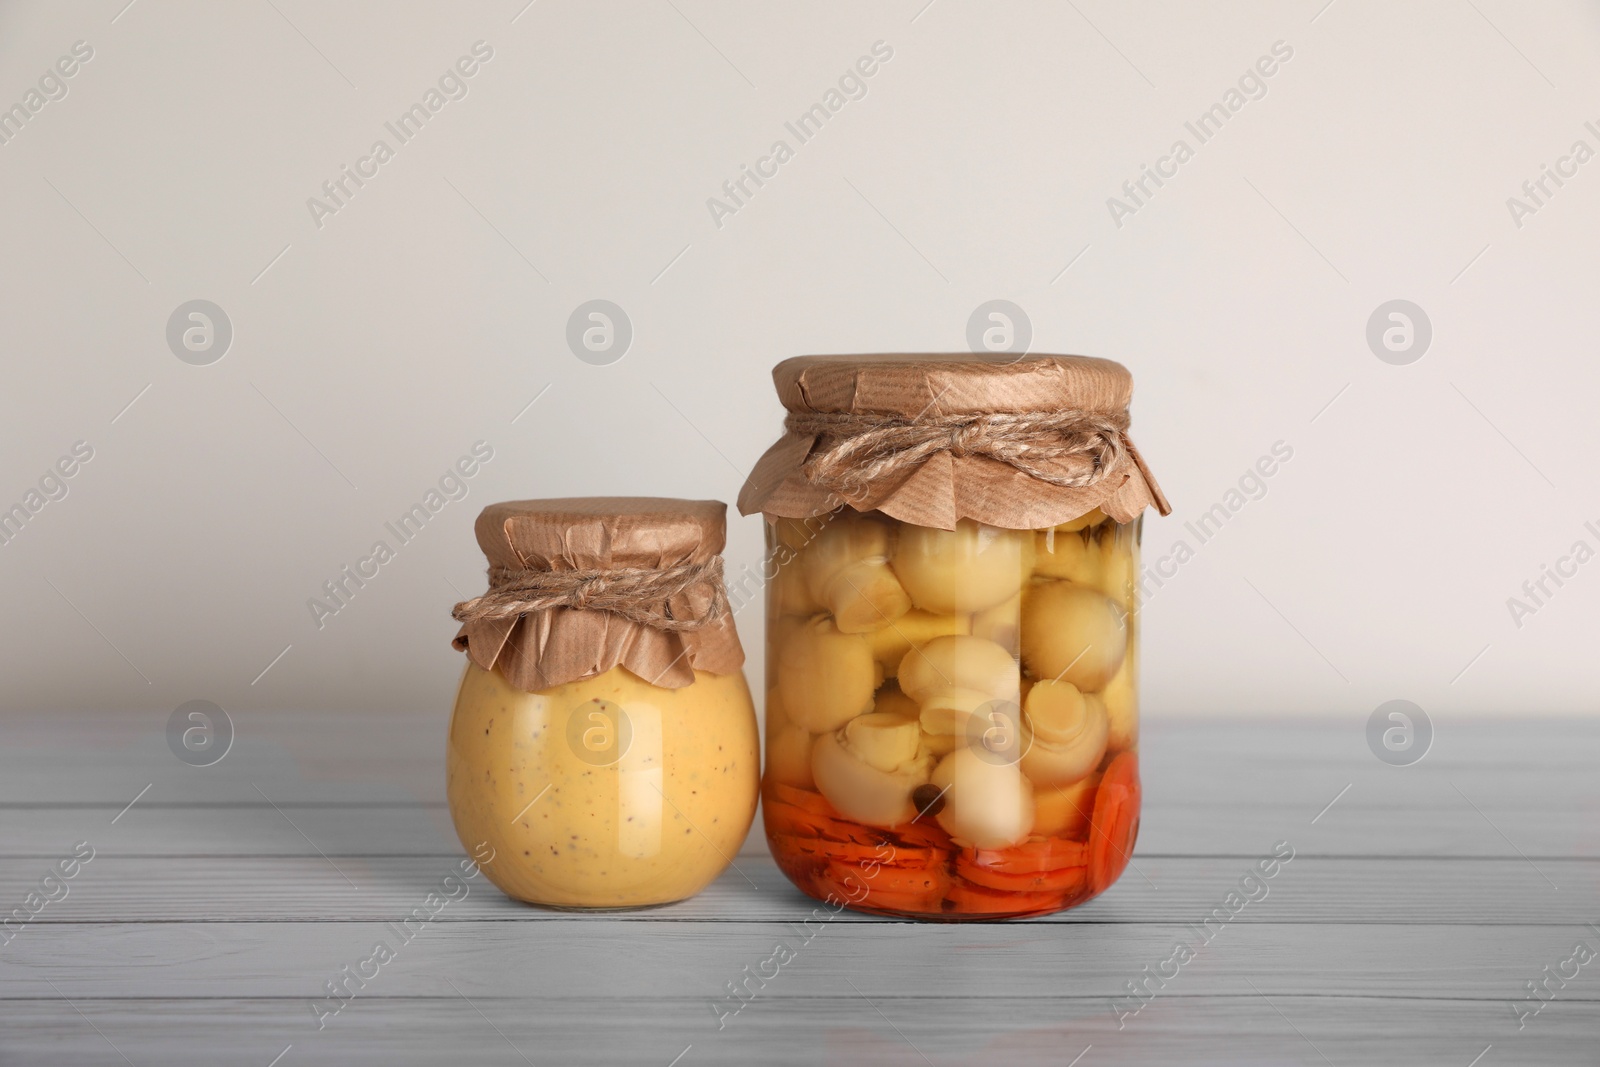 Photo of Jars with preserved ingredients on wooden table